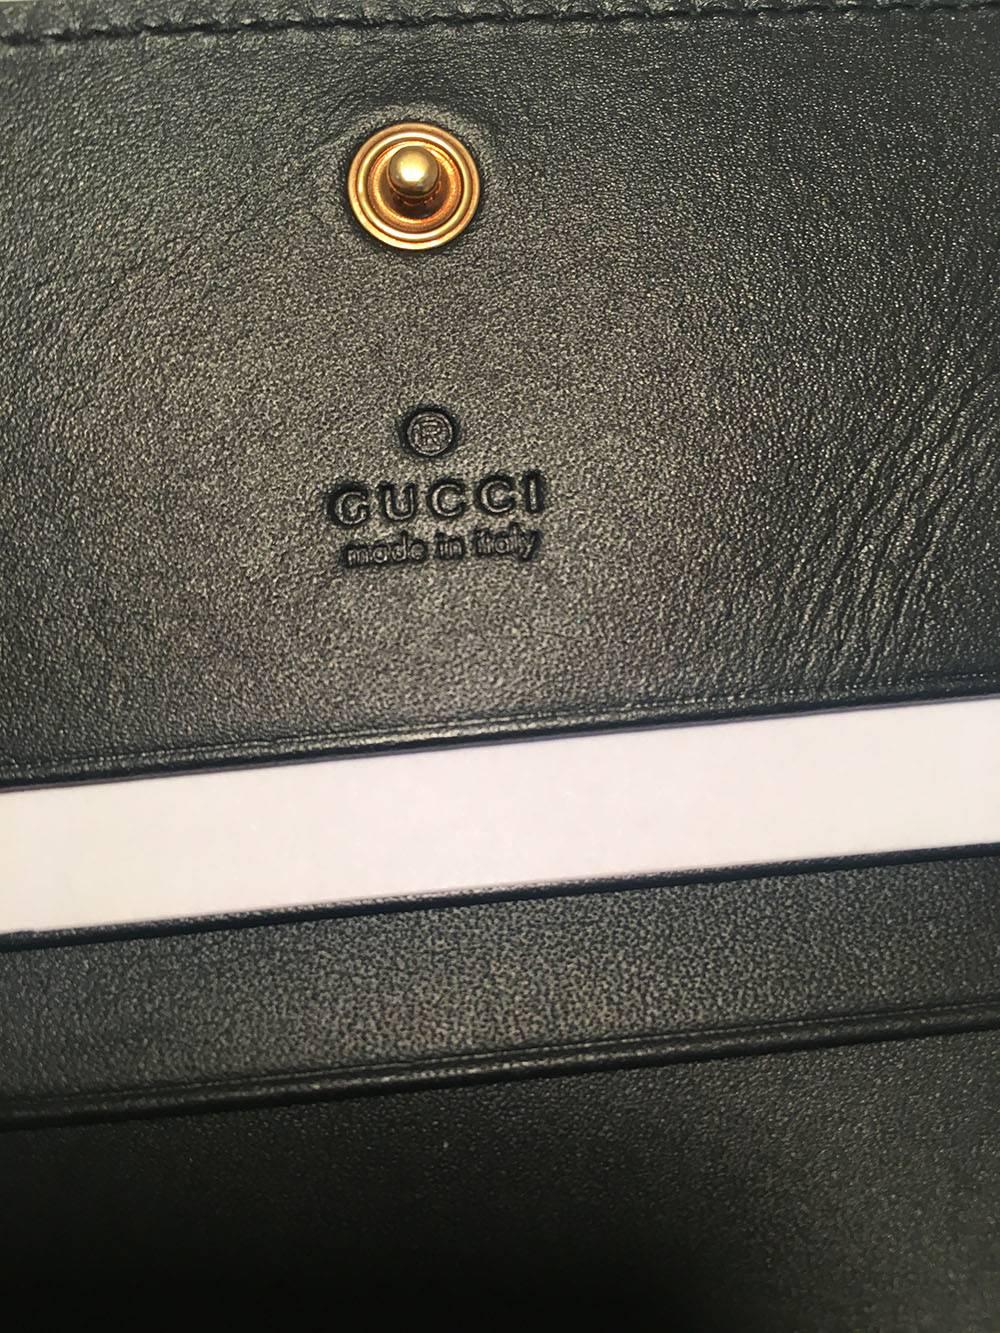 NWOT Gucci Small Navy and Cream Striped Leather Embellished Bee Wallet 2